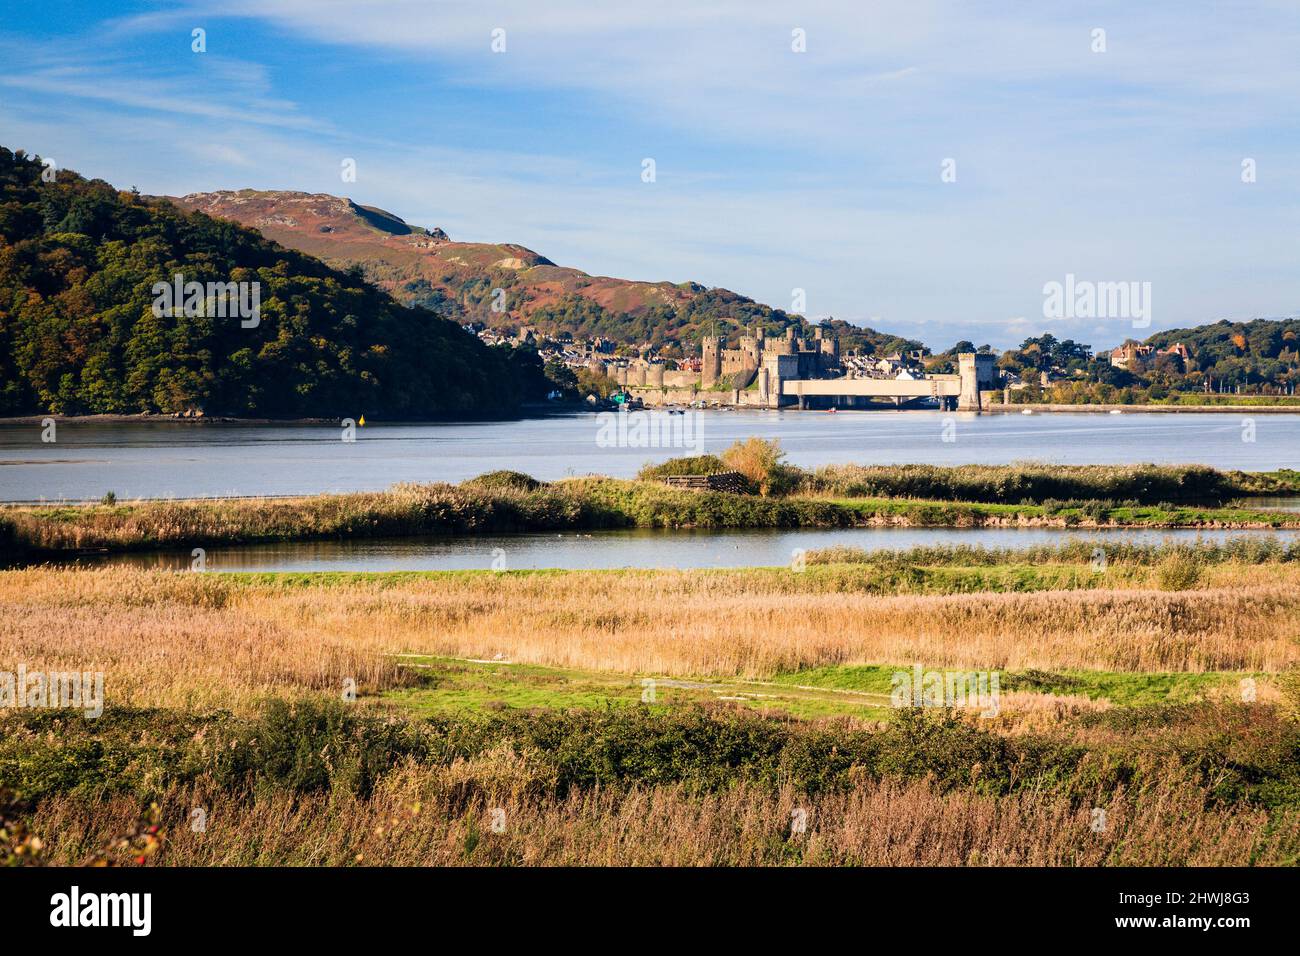 Conwy RSPB Reserve coastal lagoons and grassland habitat beside Conwy River estuary with Conwy Castle and bridge in distance. Llansanffraid Wales UK Stock Photo